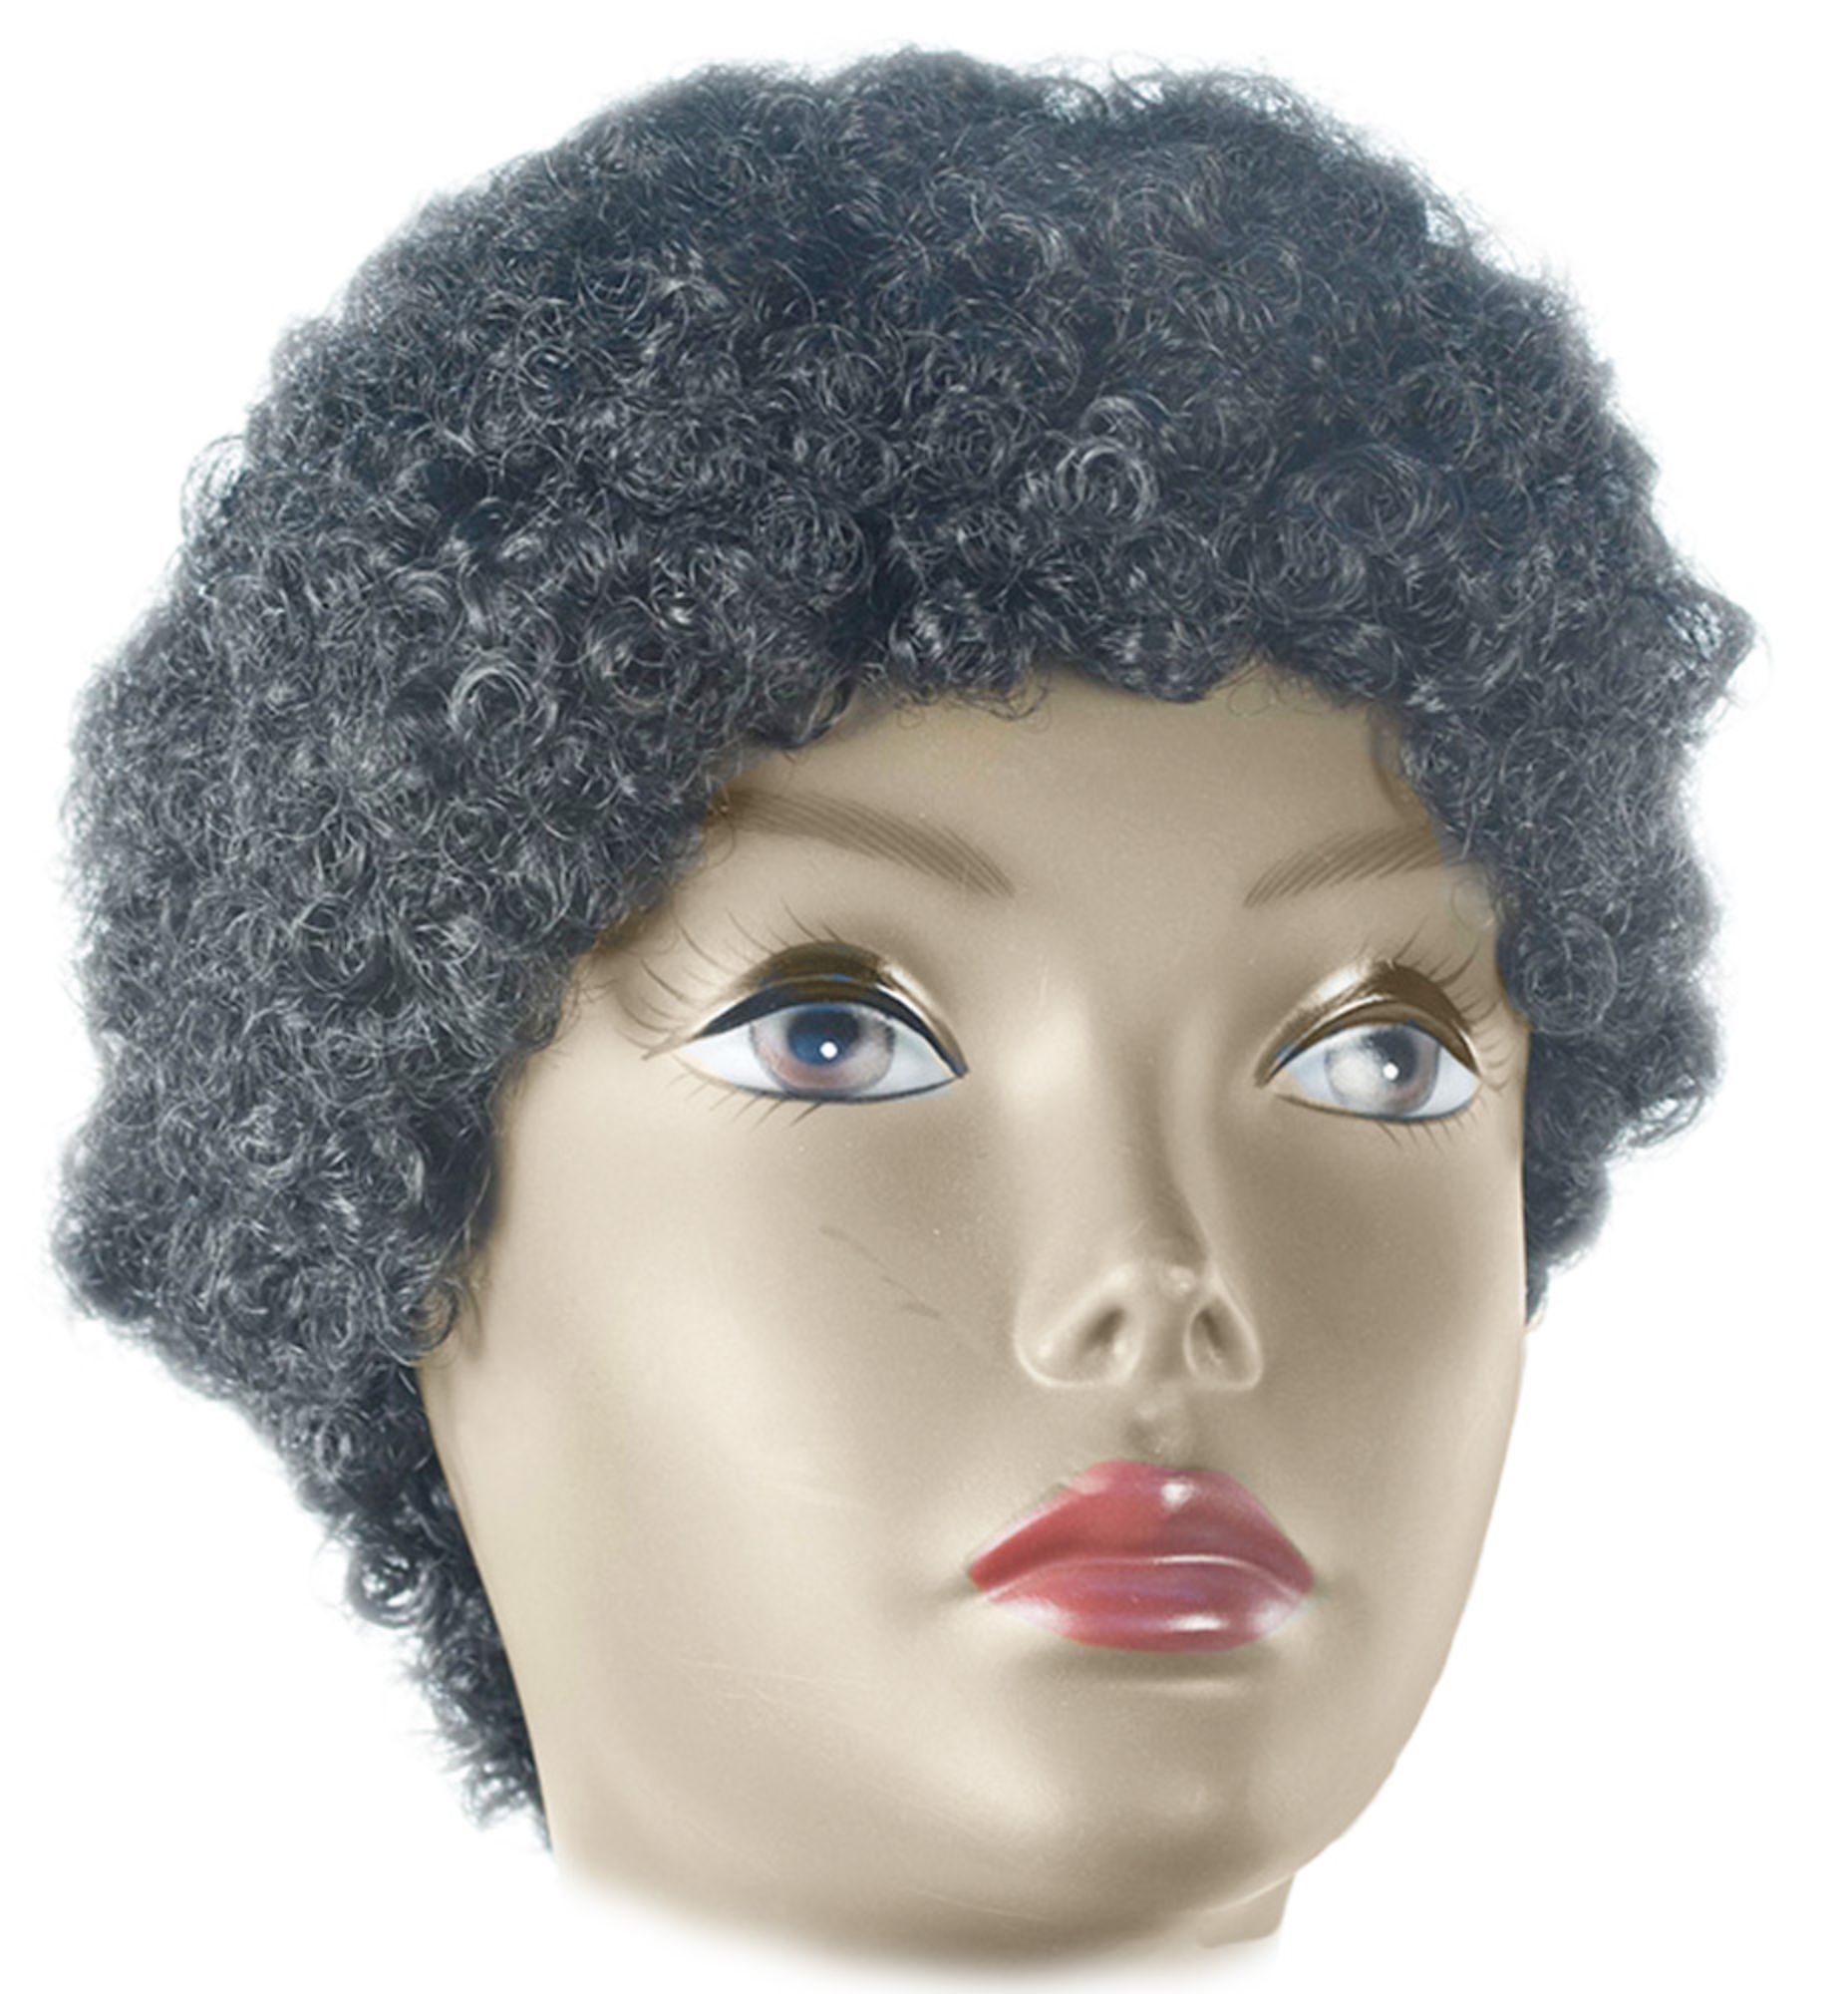 The Costume Center Black Adult Women Halloween Wig Costume Accessory - One Size